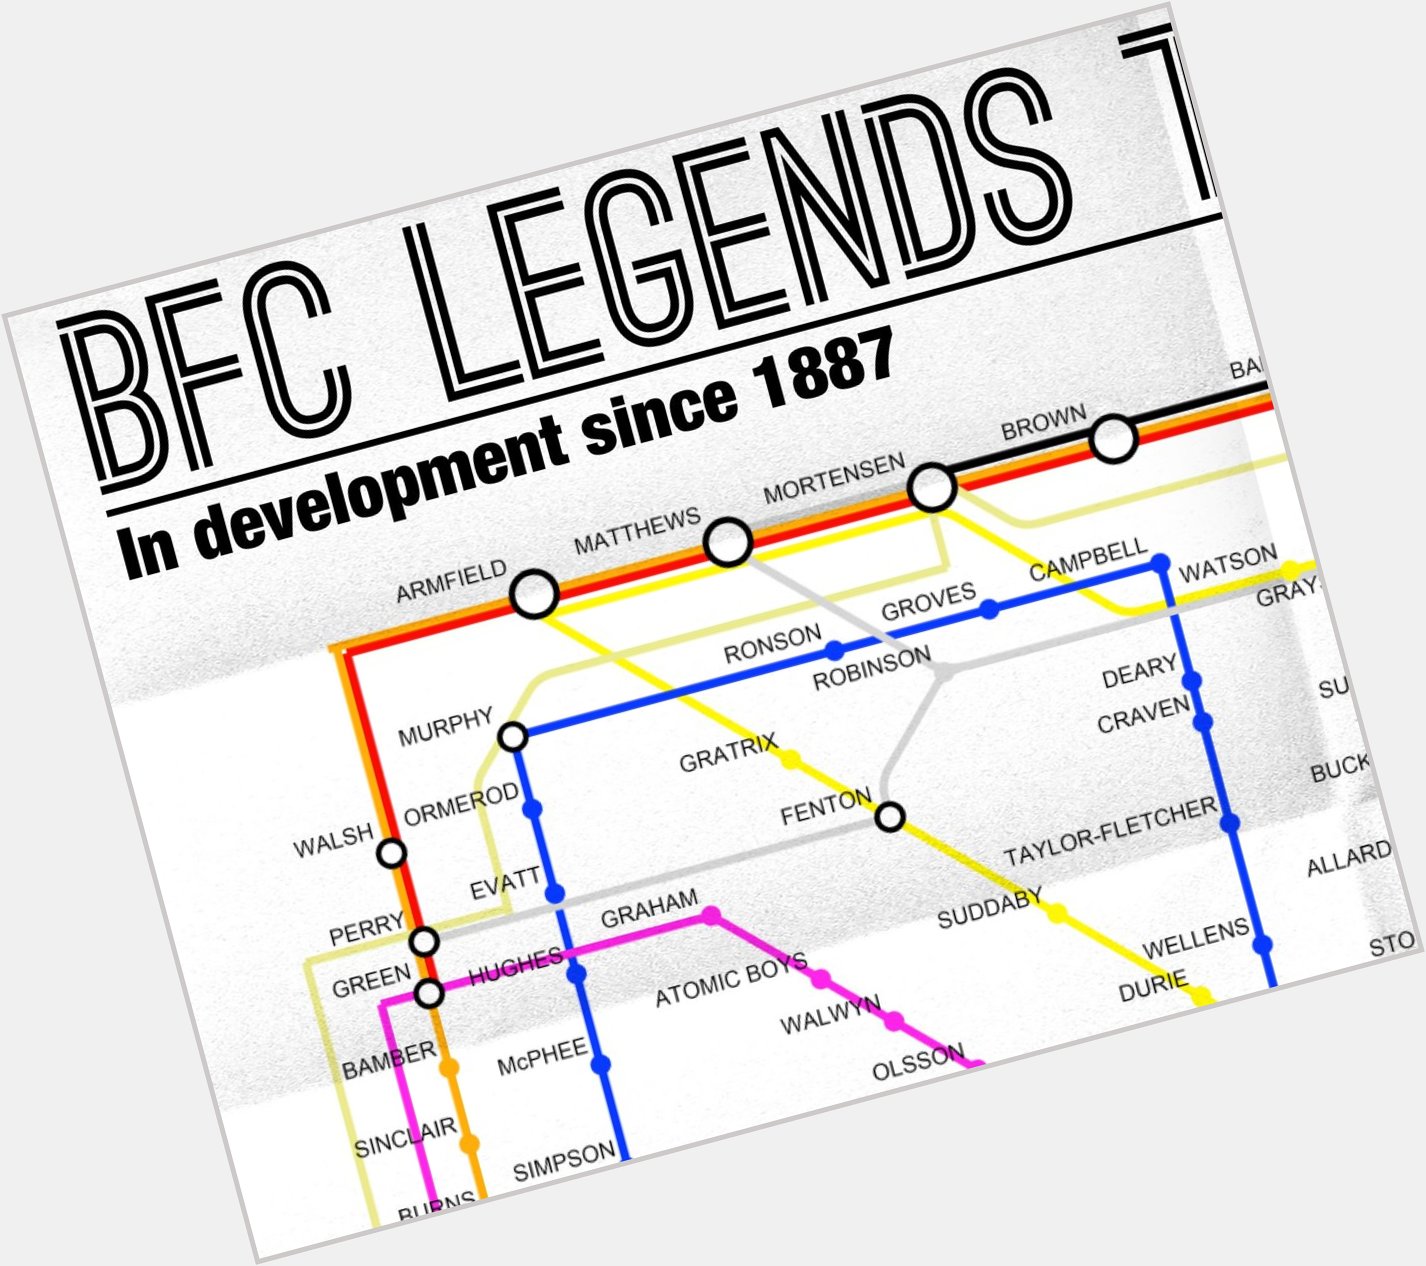 Happy Birthday to BFC Legend, Trevor Sinclair. He\ll be delighted to know he made it on to our Legends Tube Map... 